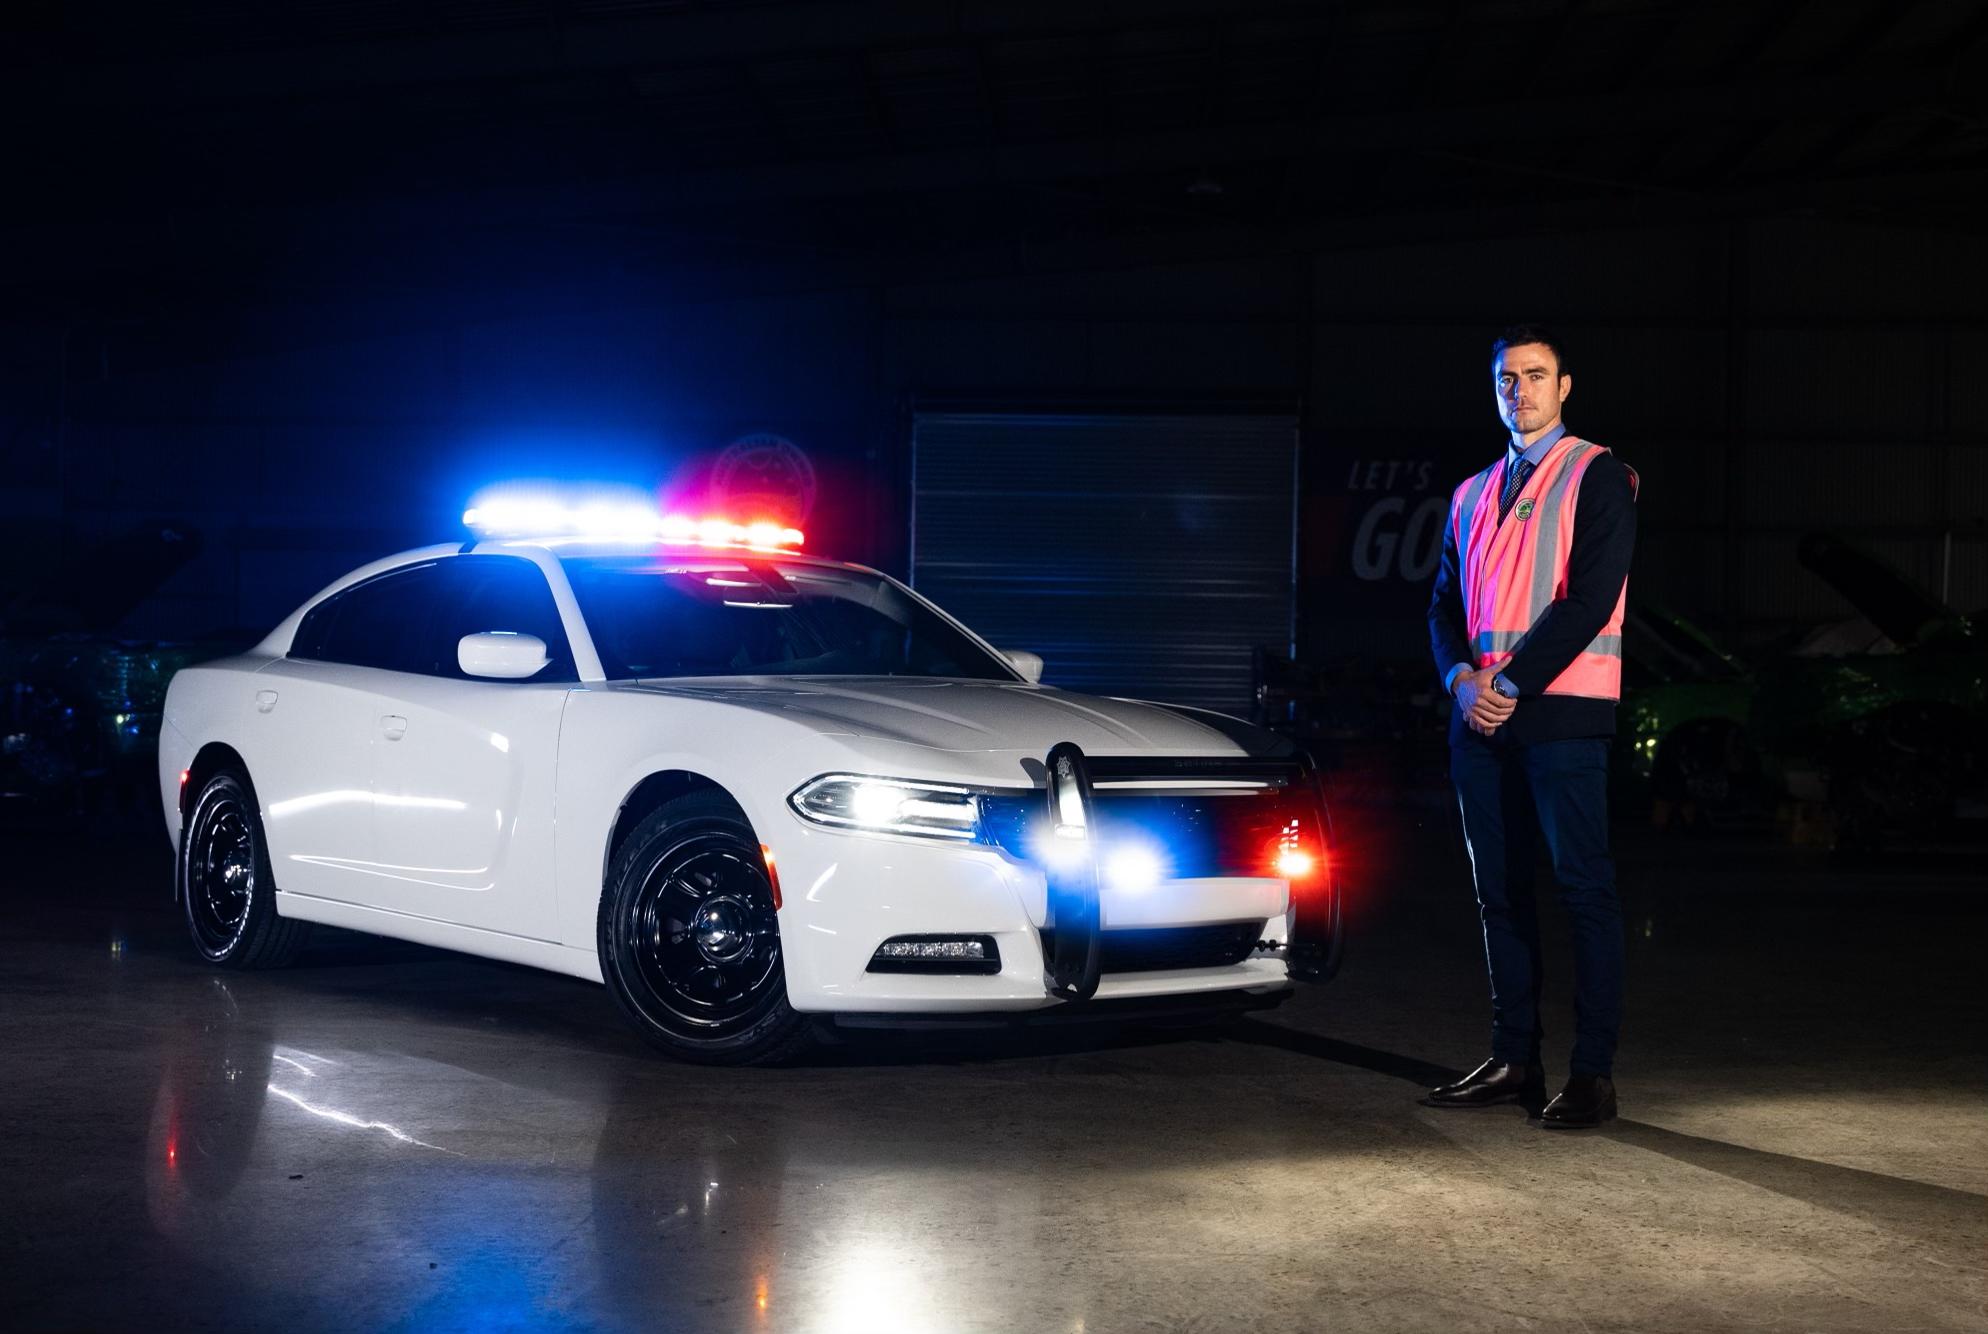 4 Things to Know About the Dodge Charger Police Car